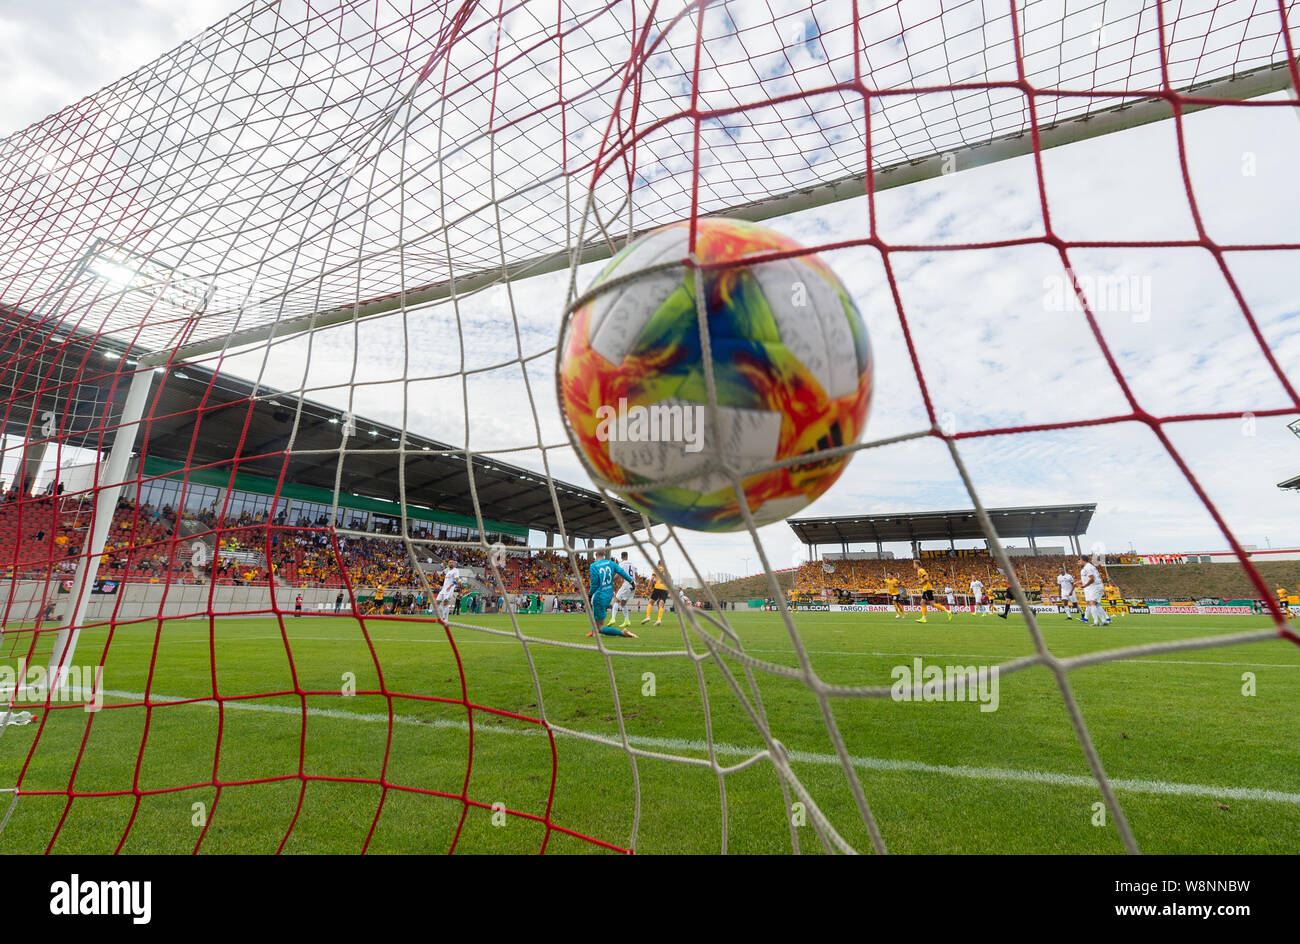 Page 18 - Soccer Ball In Goal Net High Resolution Stock Photography and  Images - Alamy